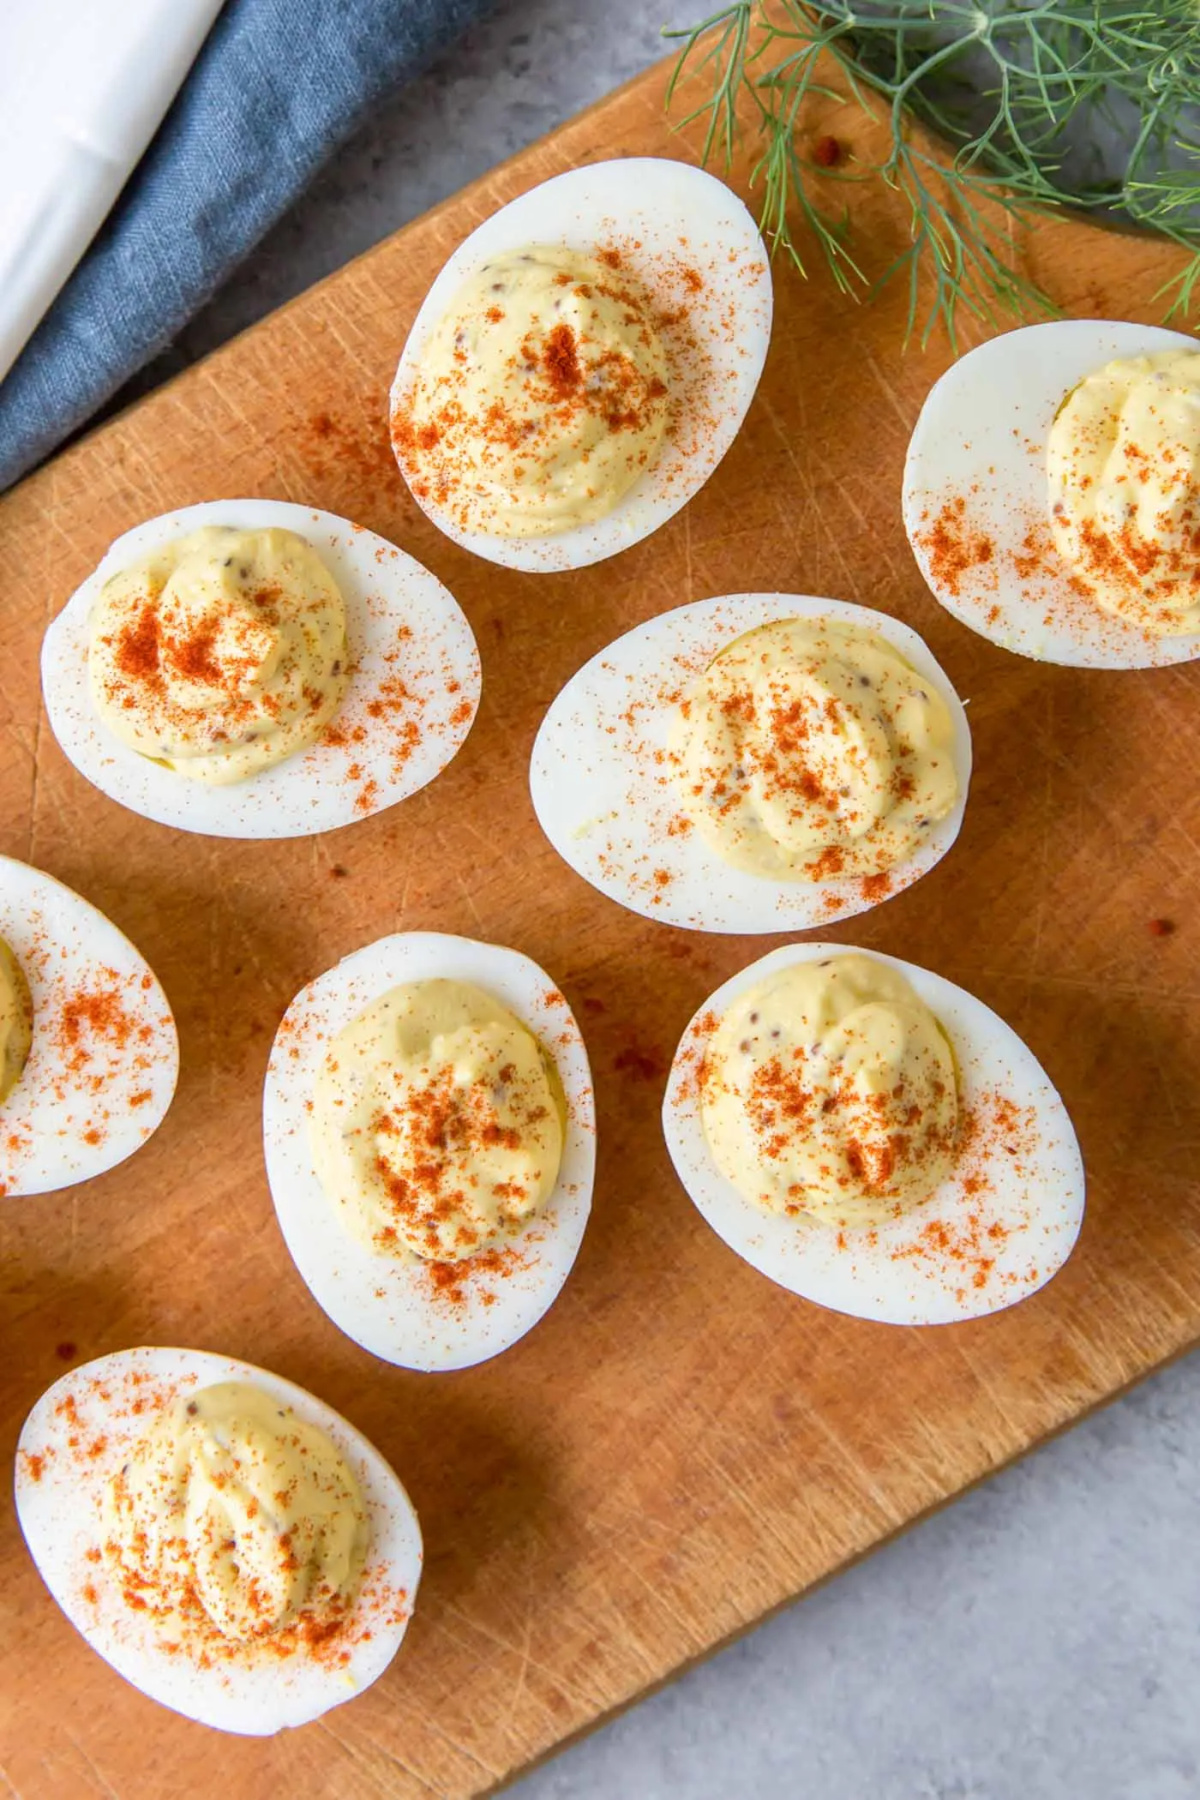 Cheap Party Foods - Deviled Eggs